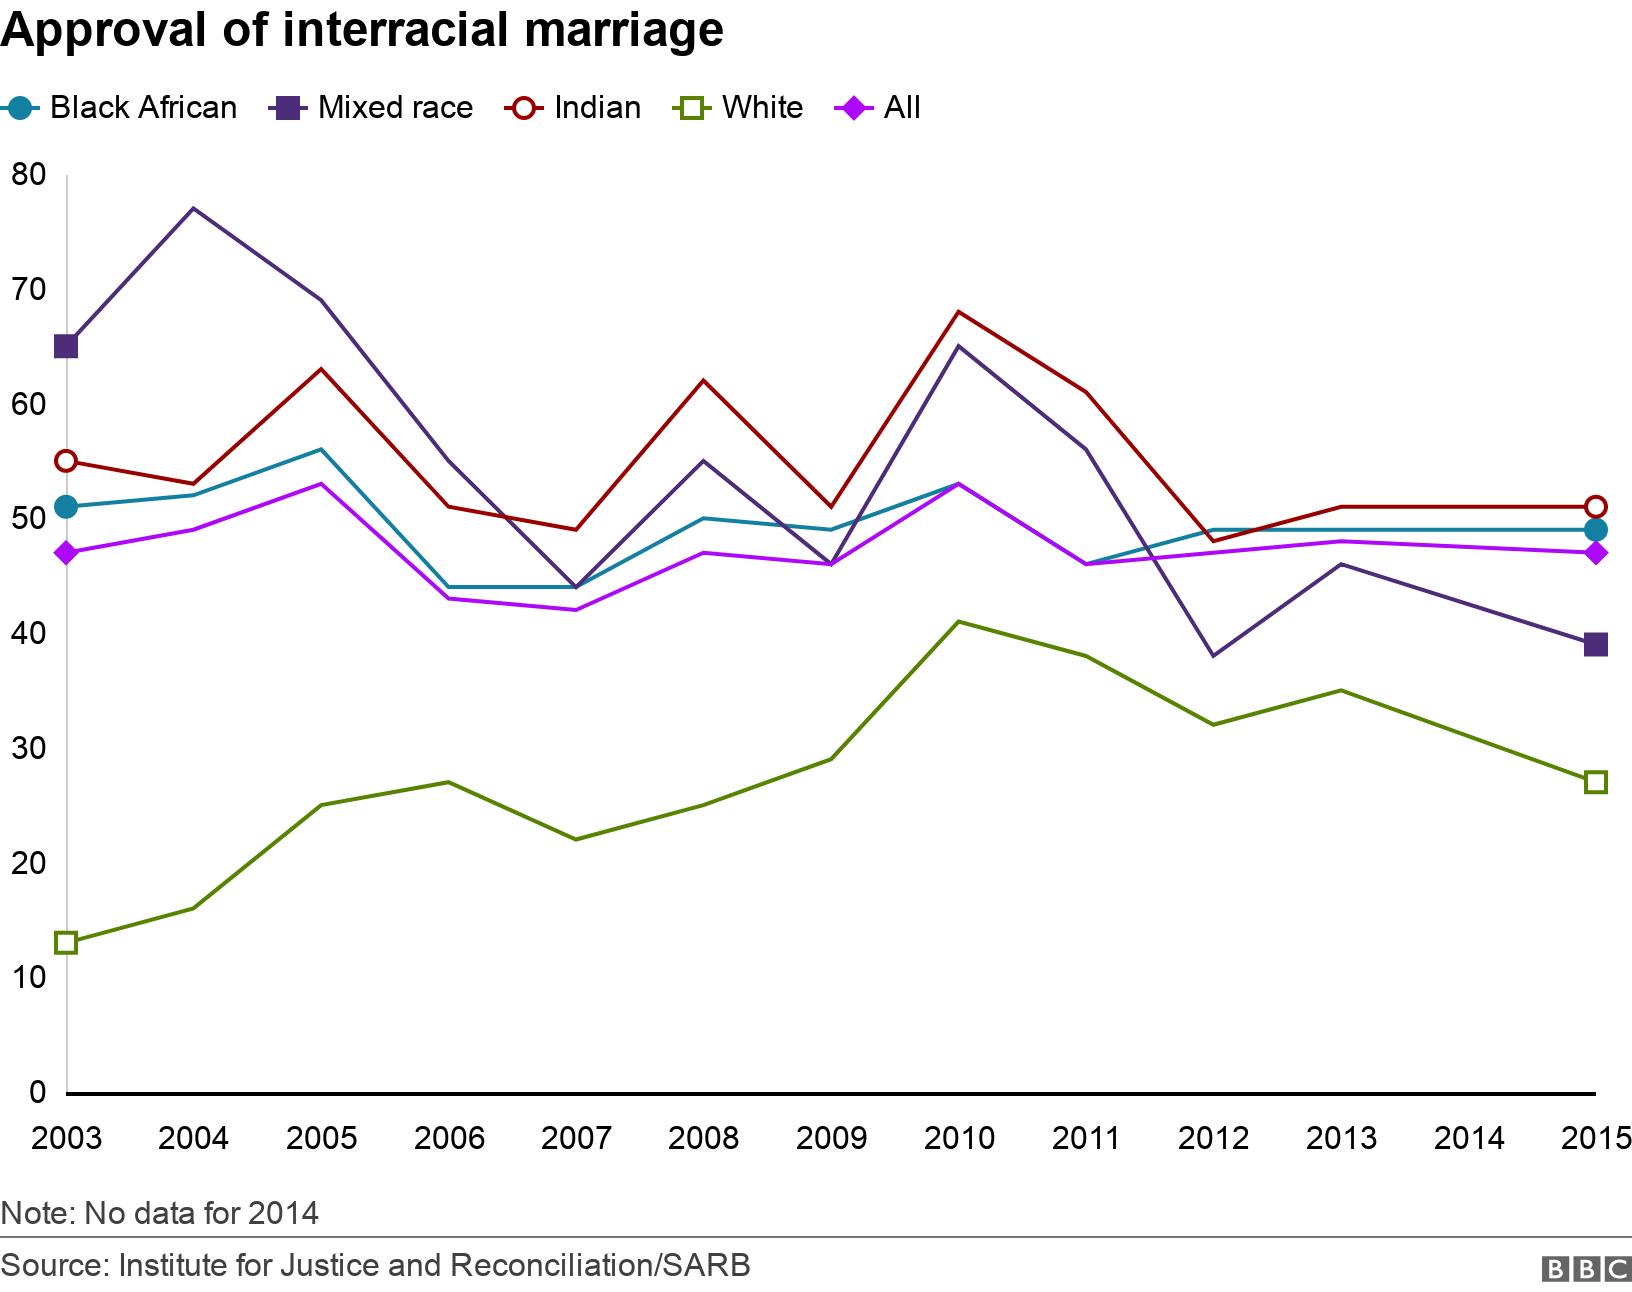 Approval of interracial marriage. . Line chart showing approval ratings for interracial marriage have broadly plateaued for all ethnic groups Note: No data for 2014.